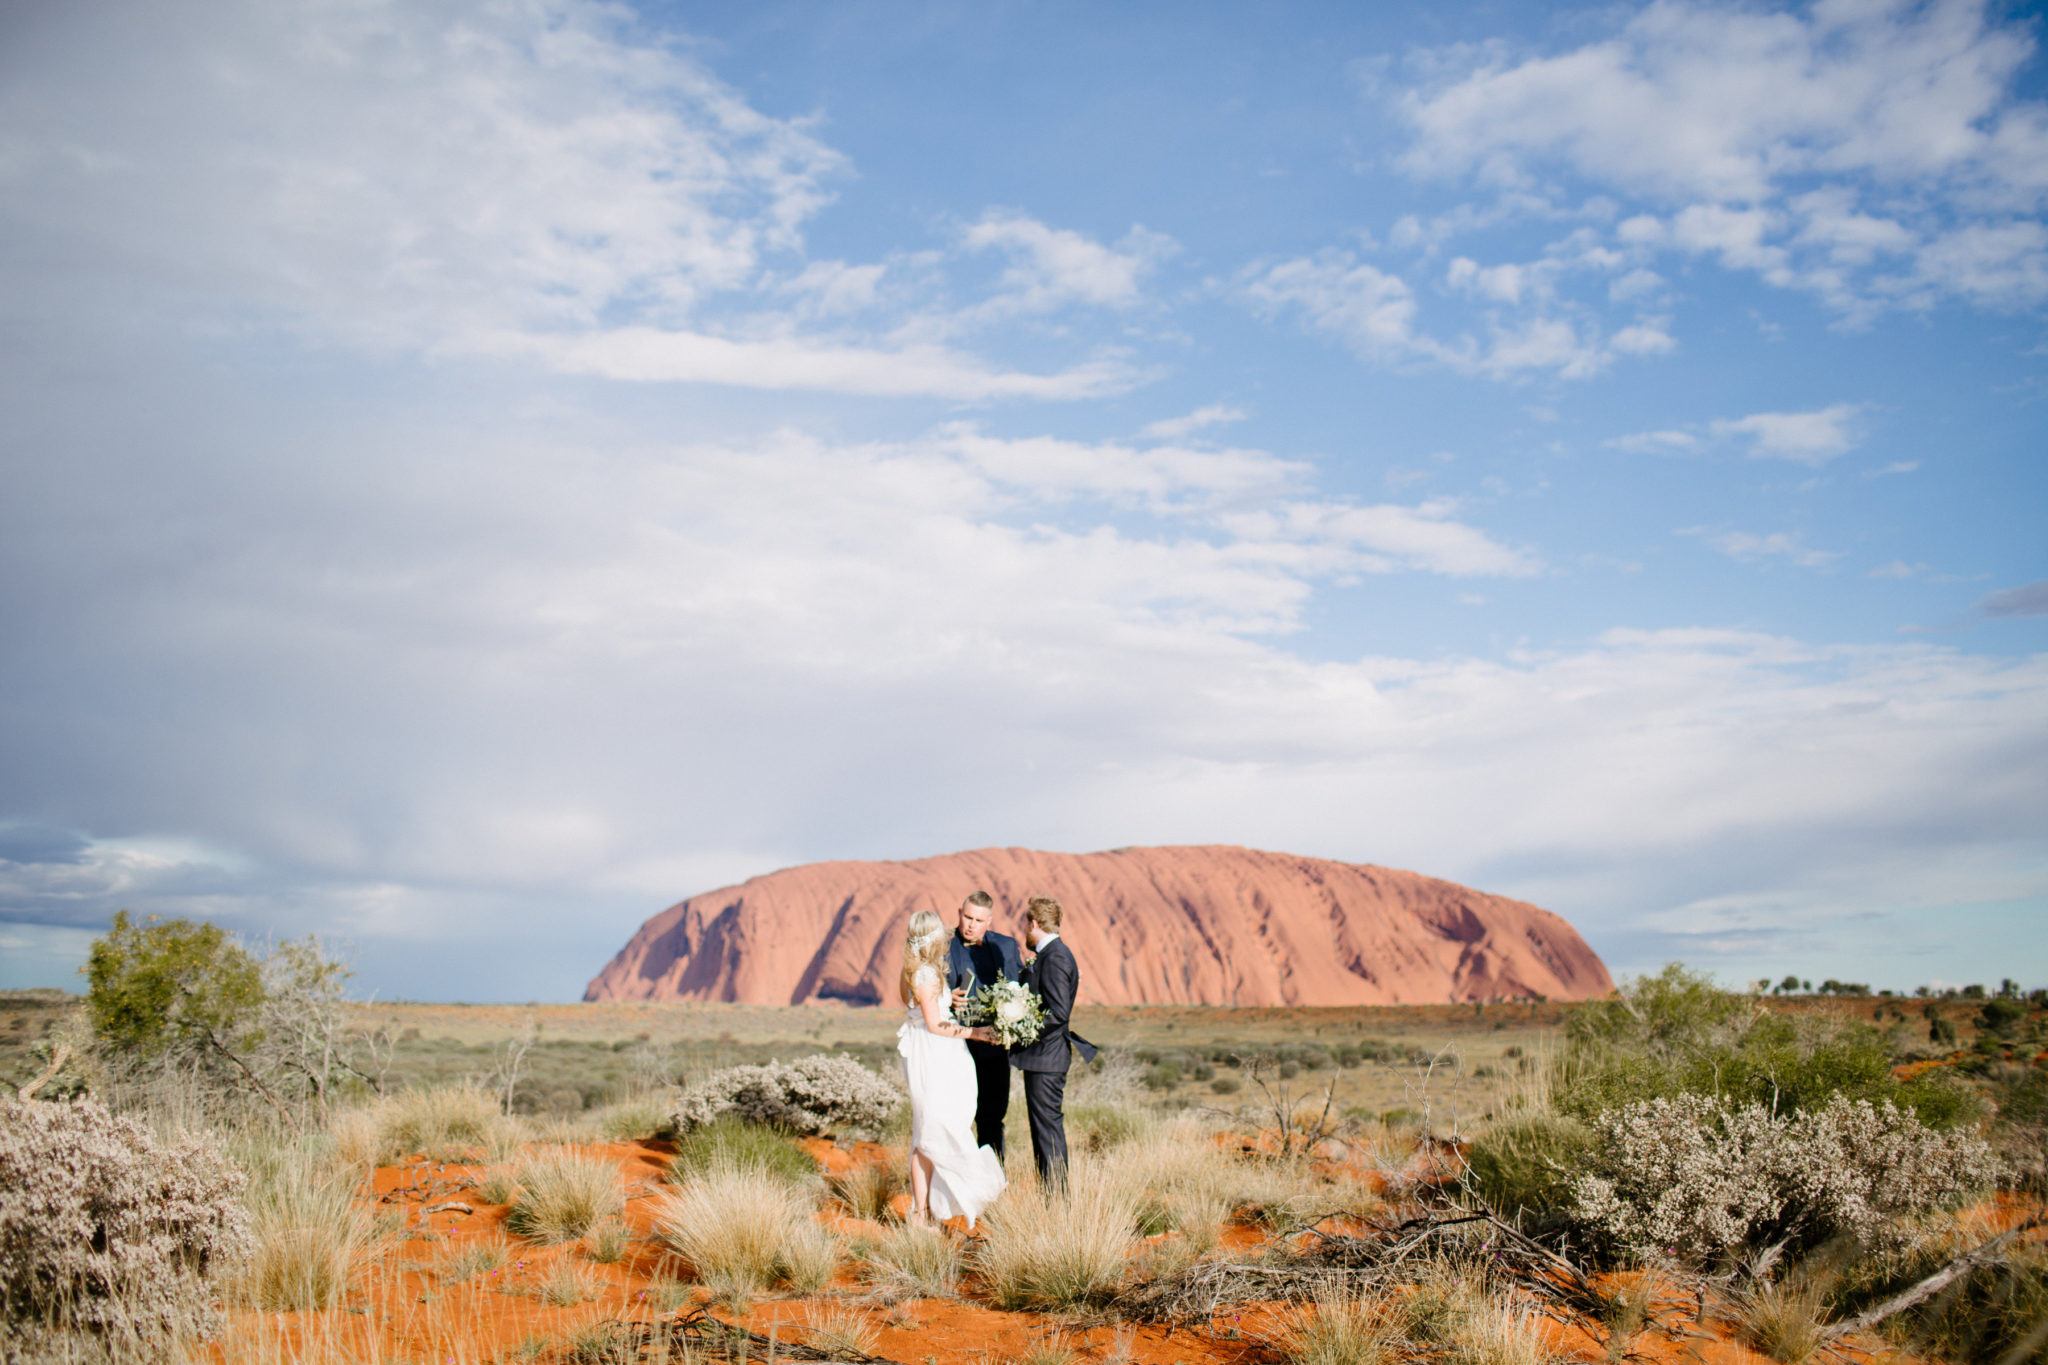 Josh Withers, Australian Wedding Celebrant and podcast guest, officiates a wedding in Australia in front of brown mountains